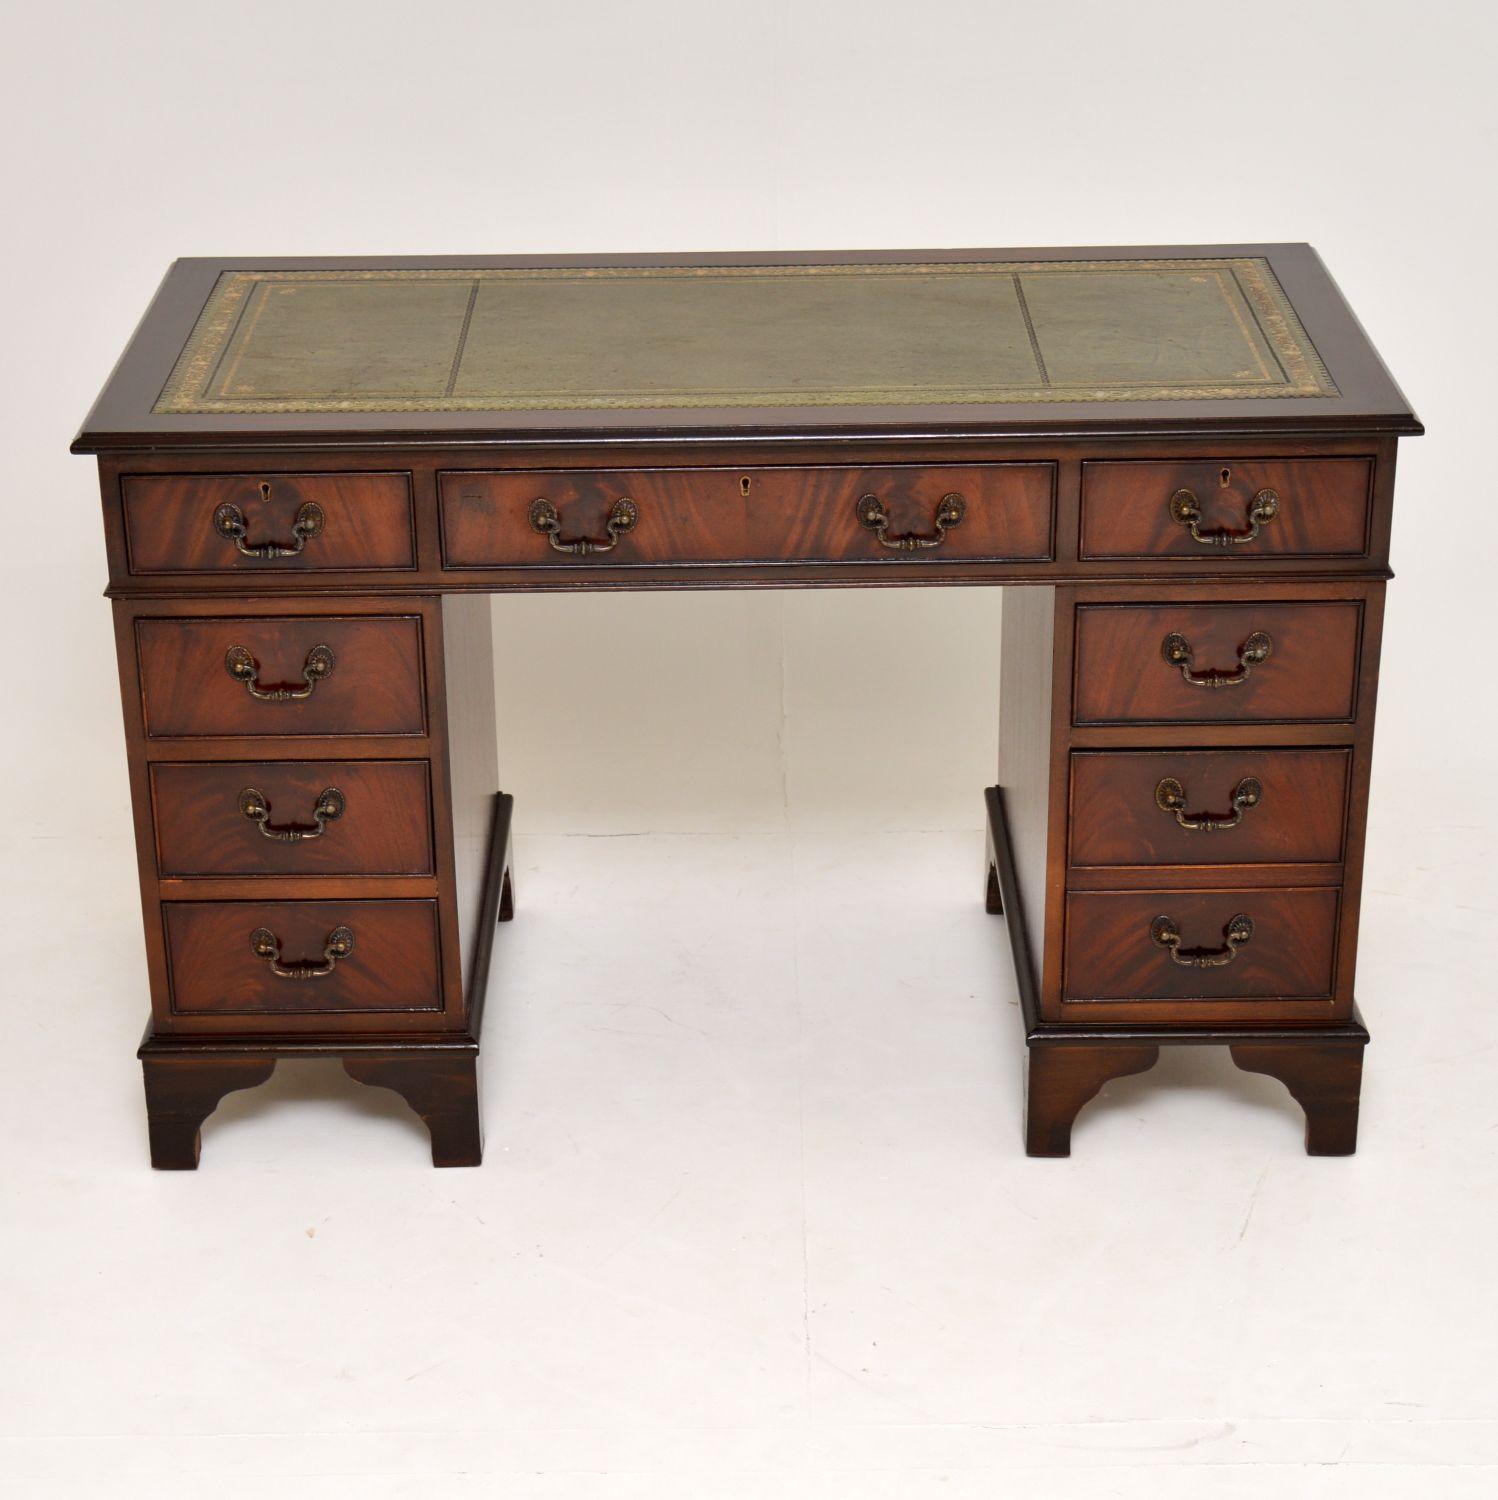 Antique George III style mahogany pedestal desk which is freestanding with a polished back.

It has a tooled leather writing surface, with panelled sides and pedestal backs. The drawer fronts are flame mahogany, with brass handles and locks on the